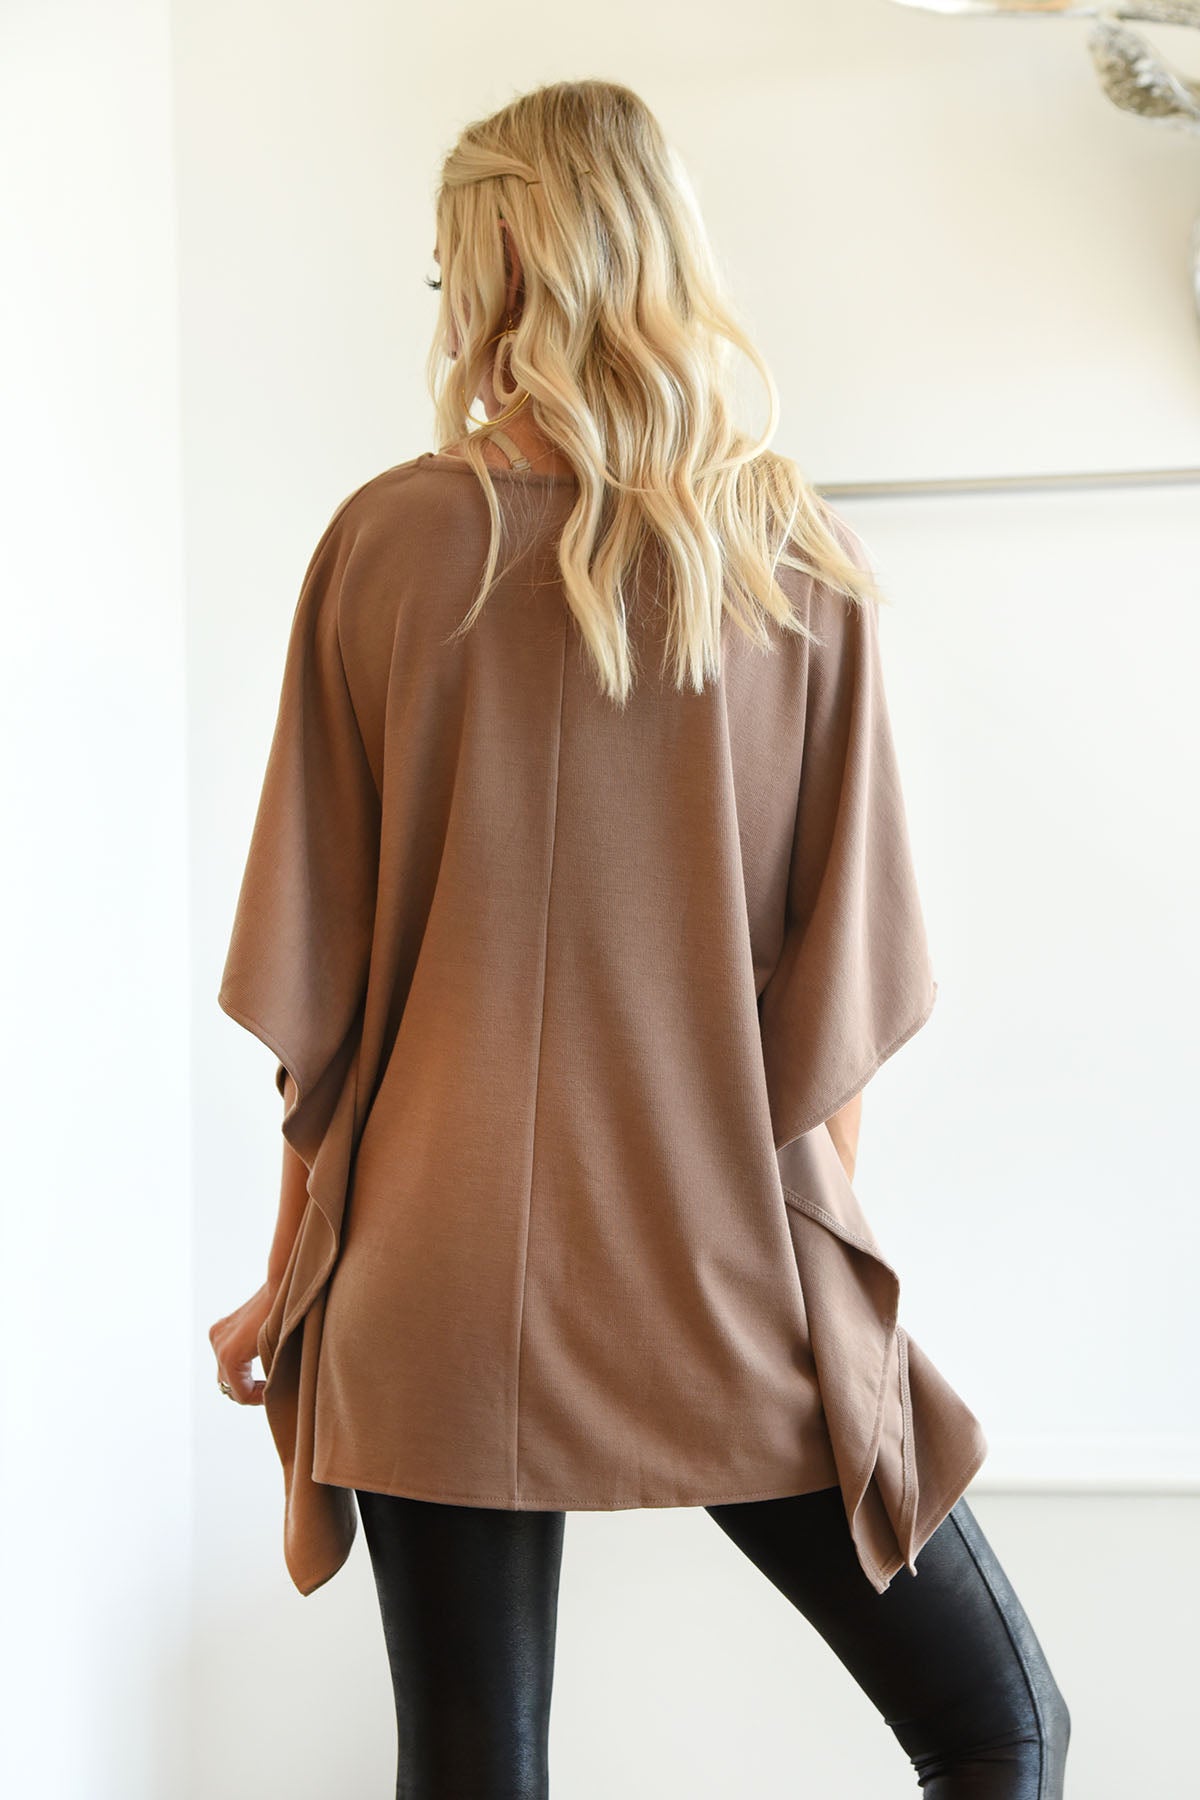 WE COULD BE BEAUTIFUL TOP -MOCHA - Dear Stella Boutique